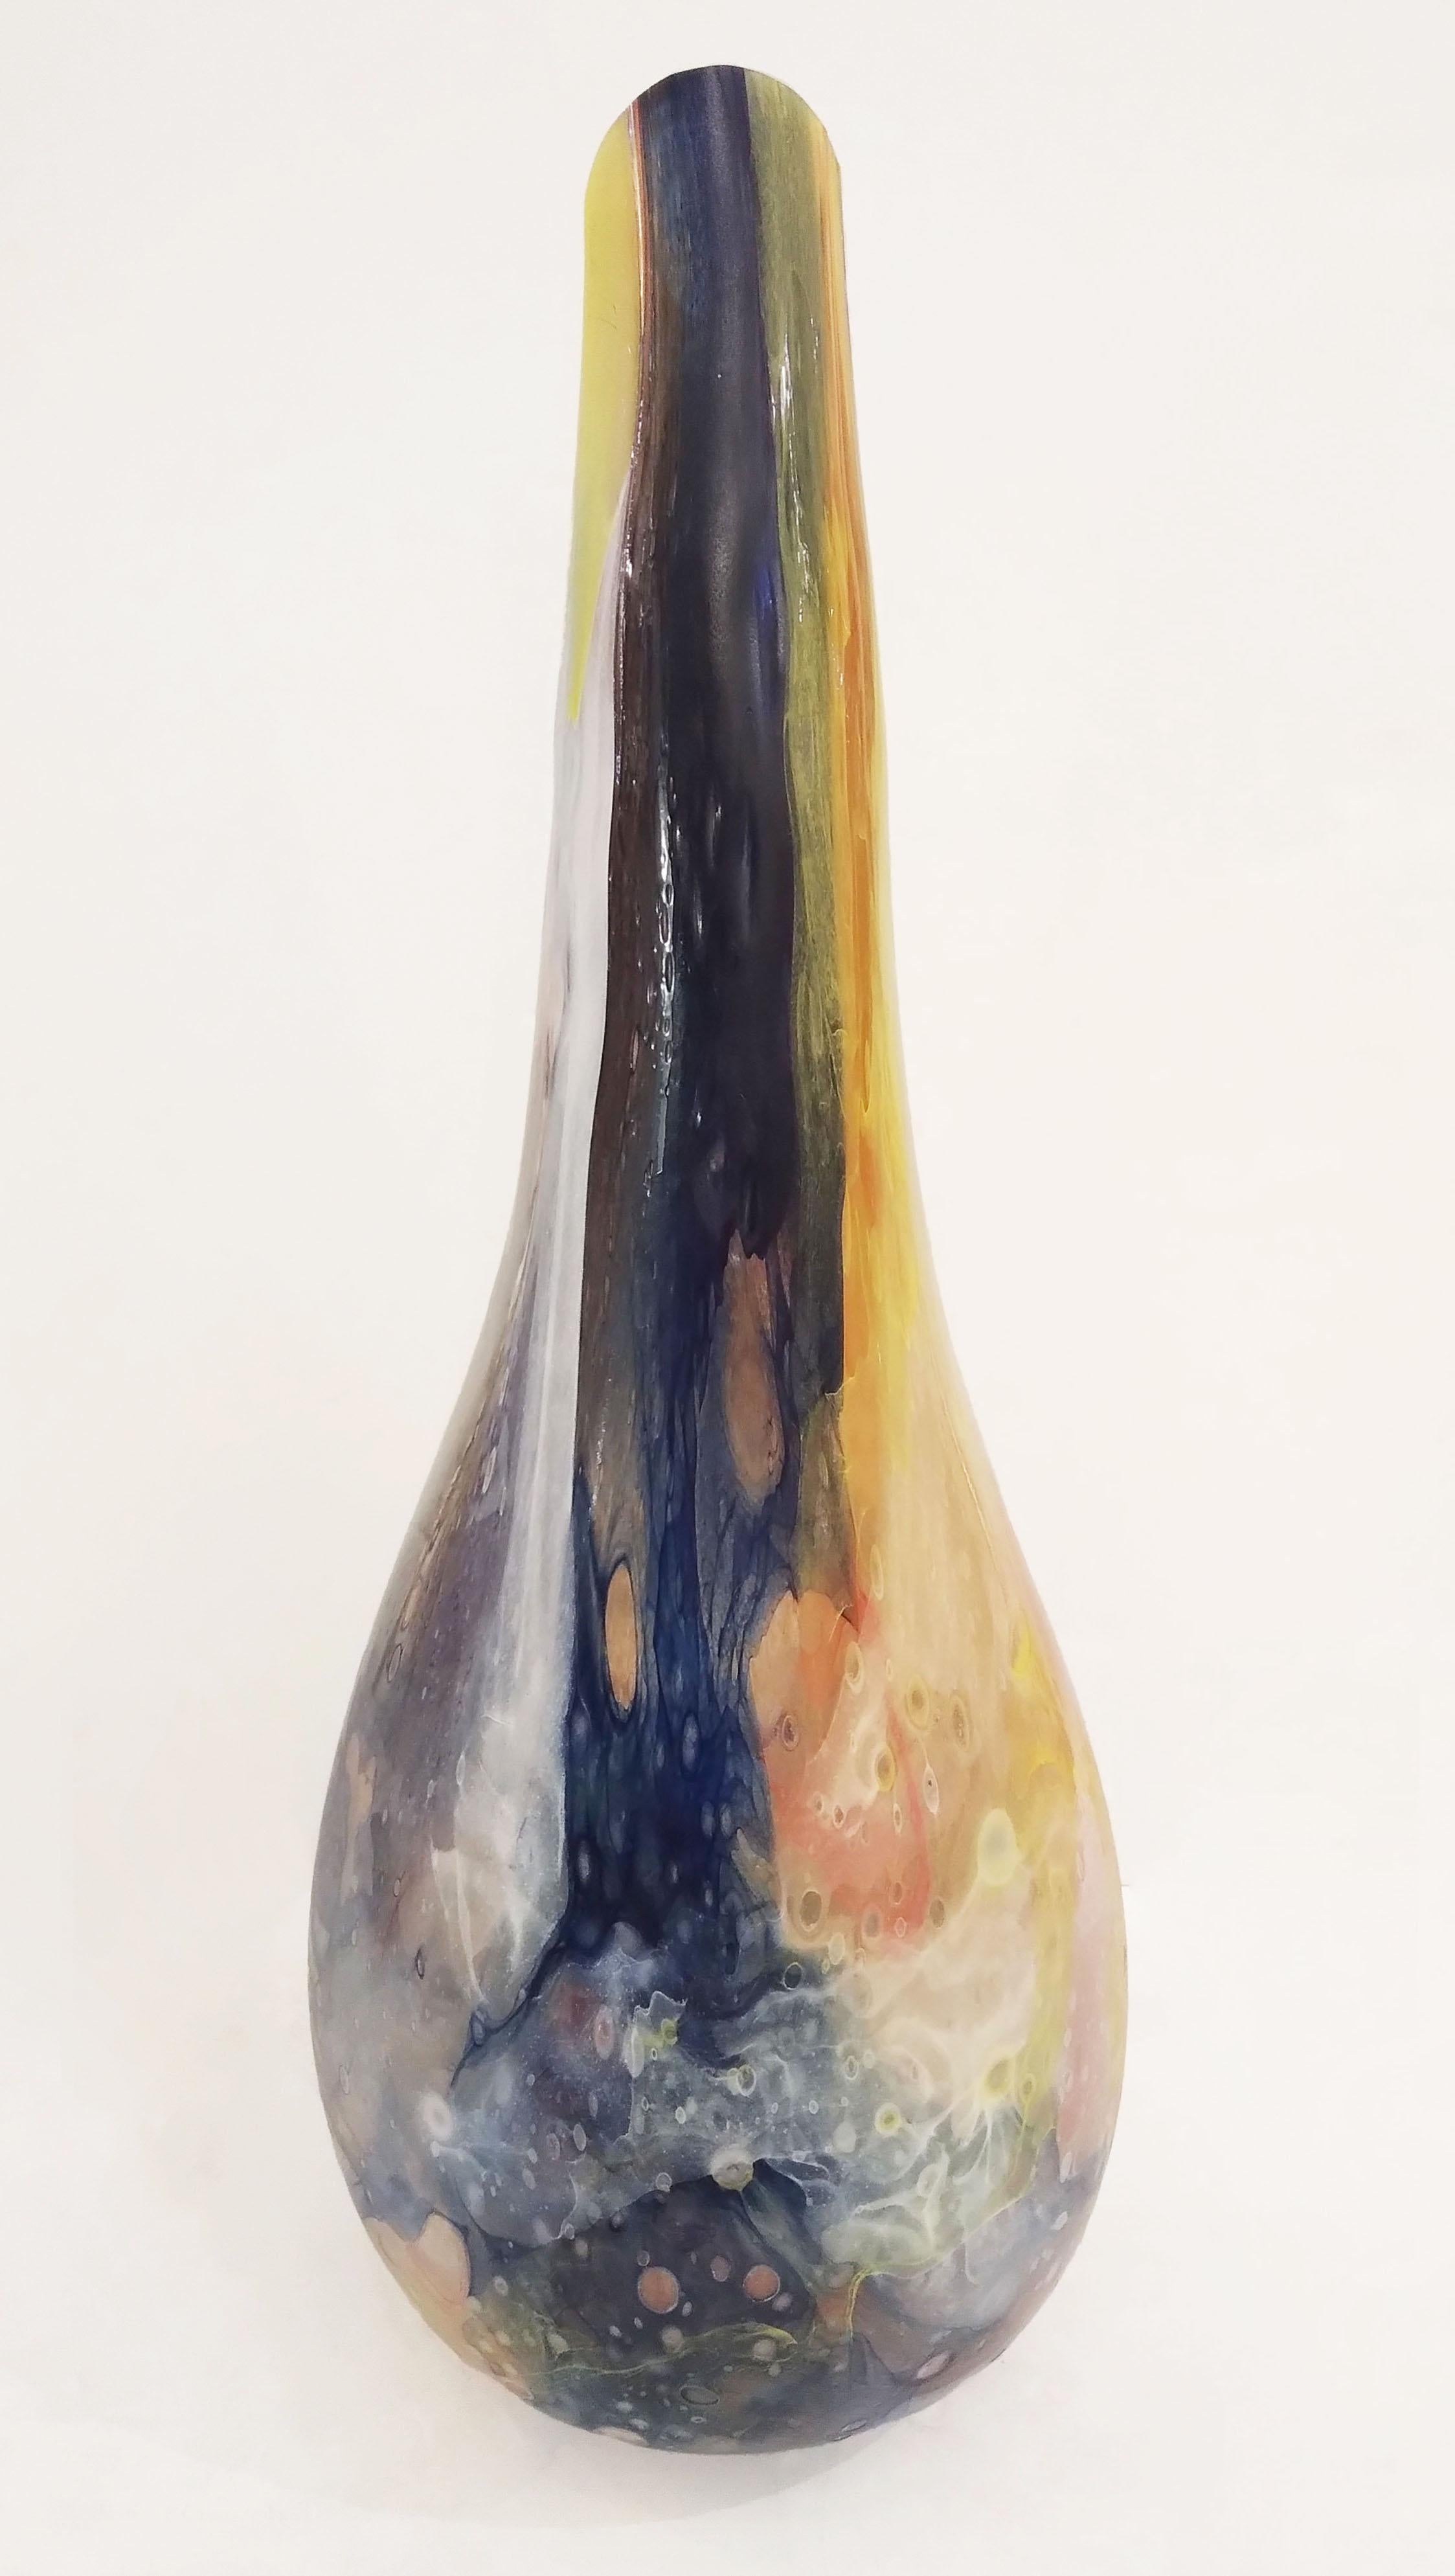 Organic Modern Italian Yellow Red Blue Silver Overlaid Crystal Murano Glass Sculpture Vase For Sale